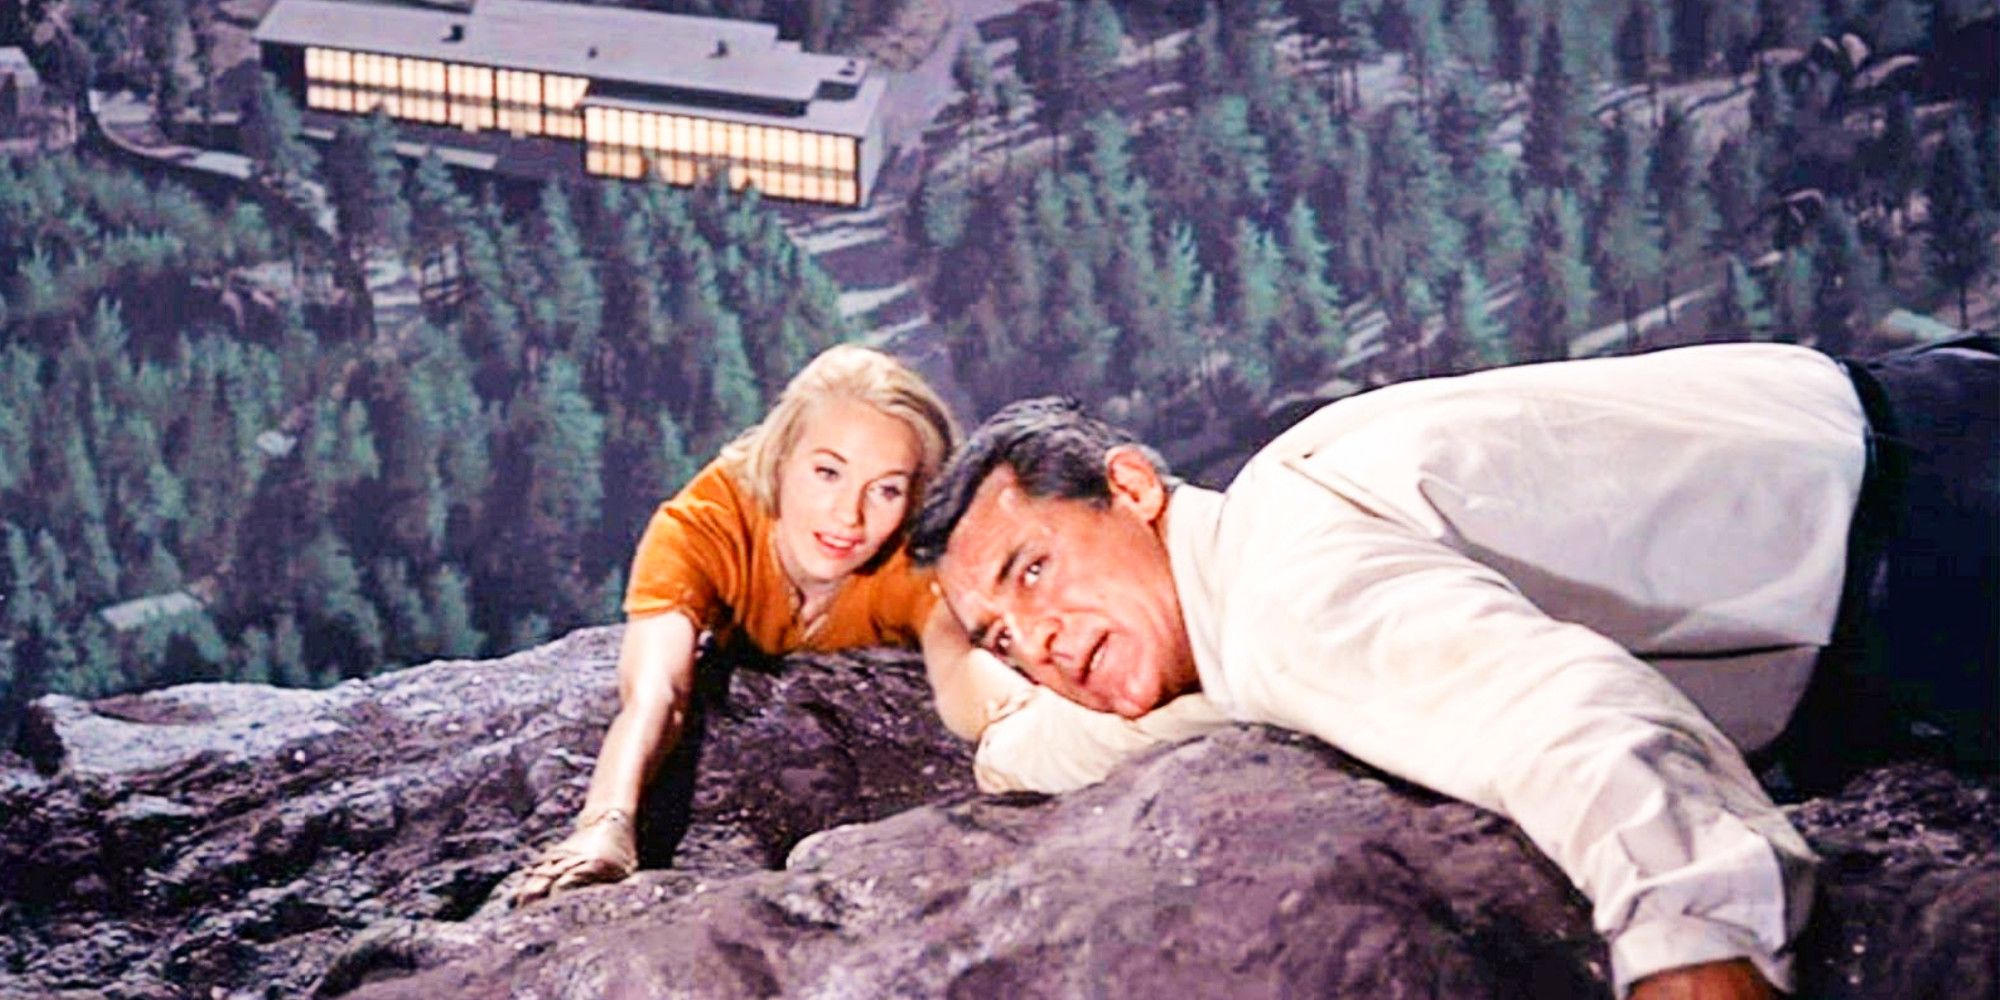 Cary Grant as Roger Thornhill and Eva Marie Saint as Eve Kendall in North By Northwest